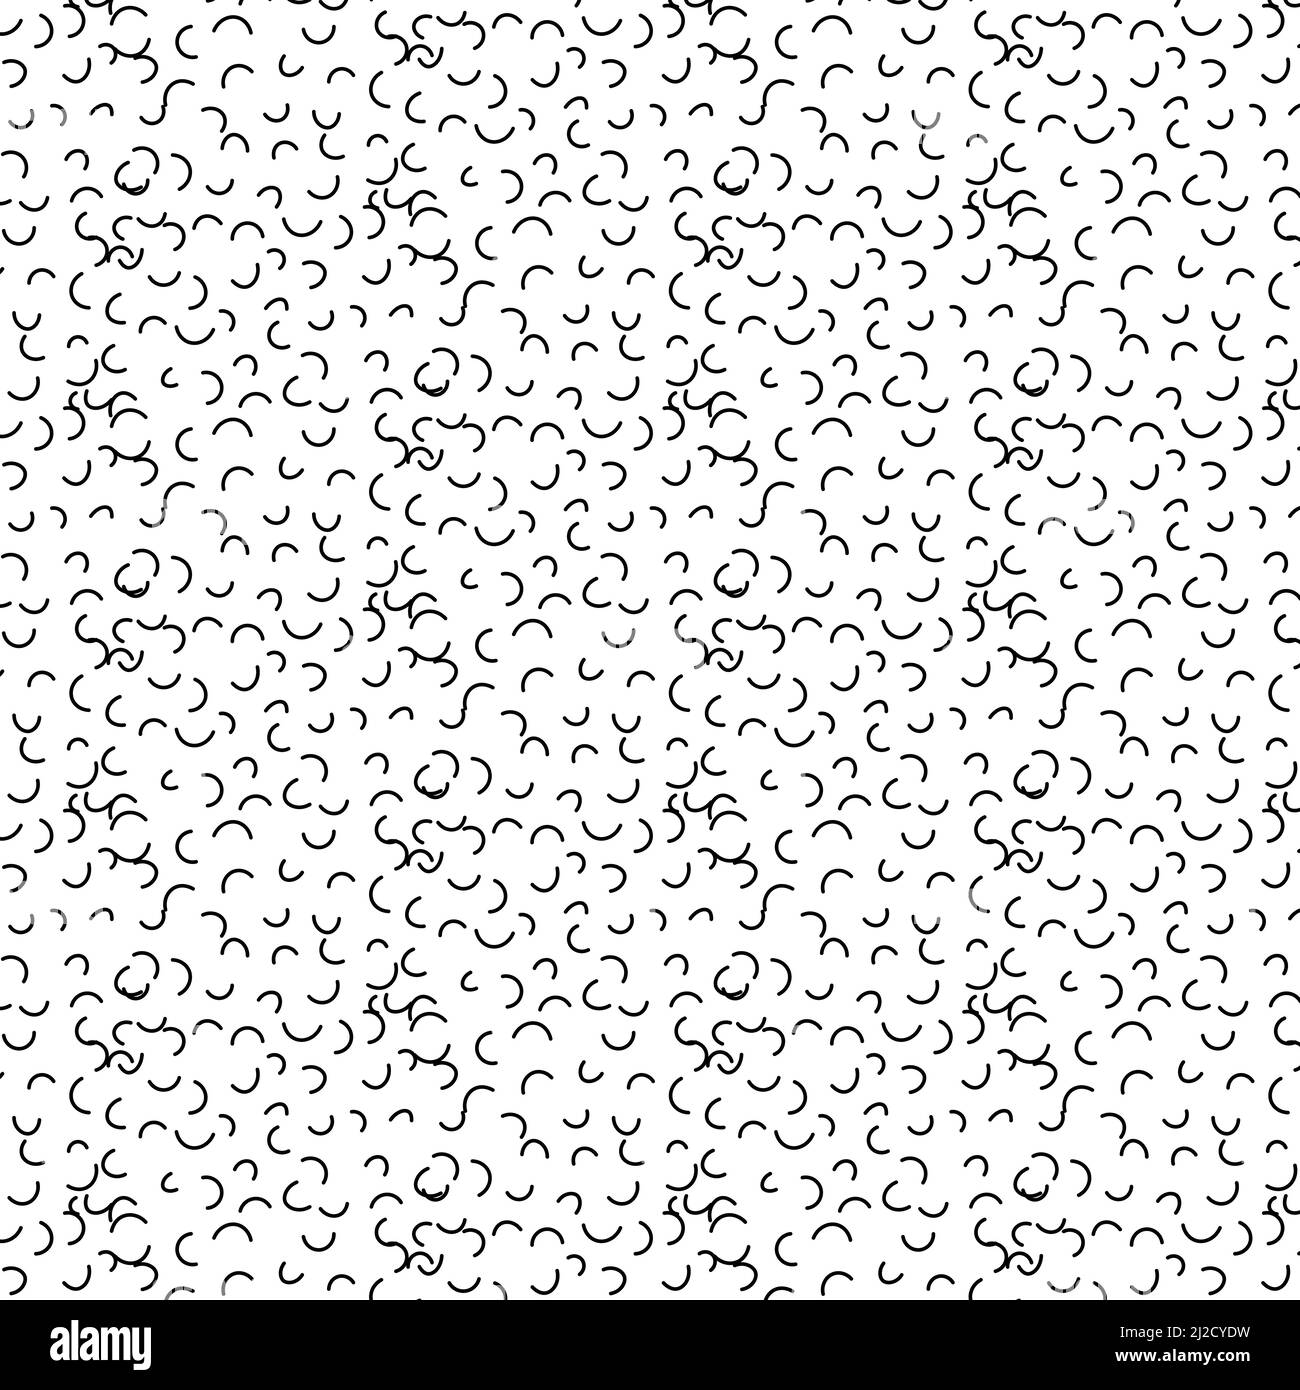 Zen art doodle ornate abstract background. Hand drawn black and white linear squiggles. Creative zenart monochrome texture. Random repeat chaotic zentangle surface design. Vector illustration Stock Vector